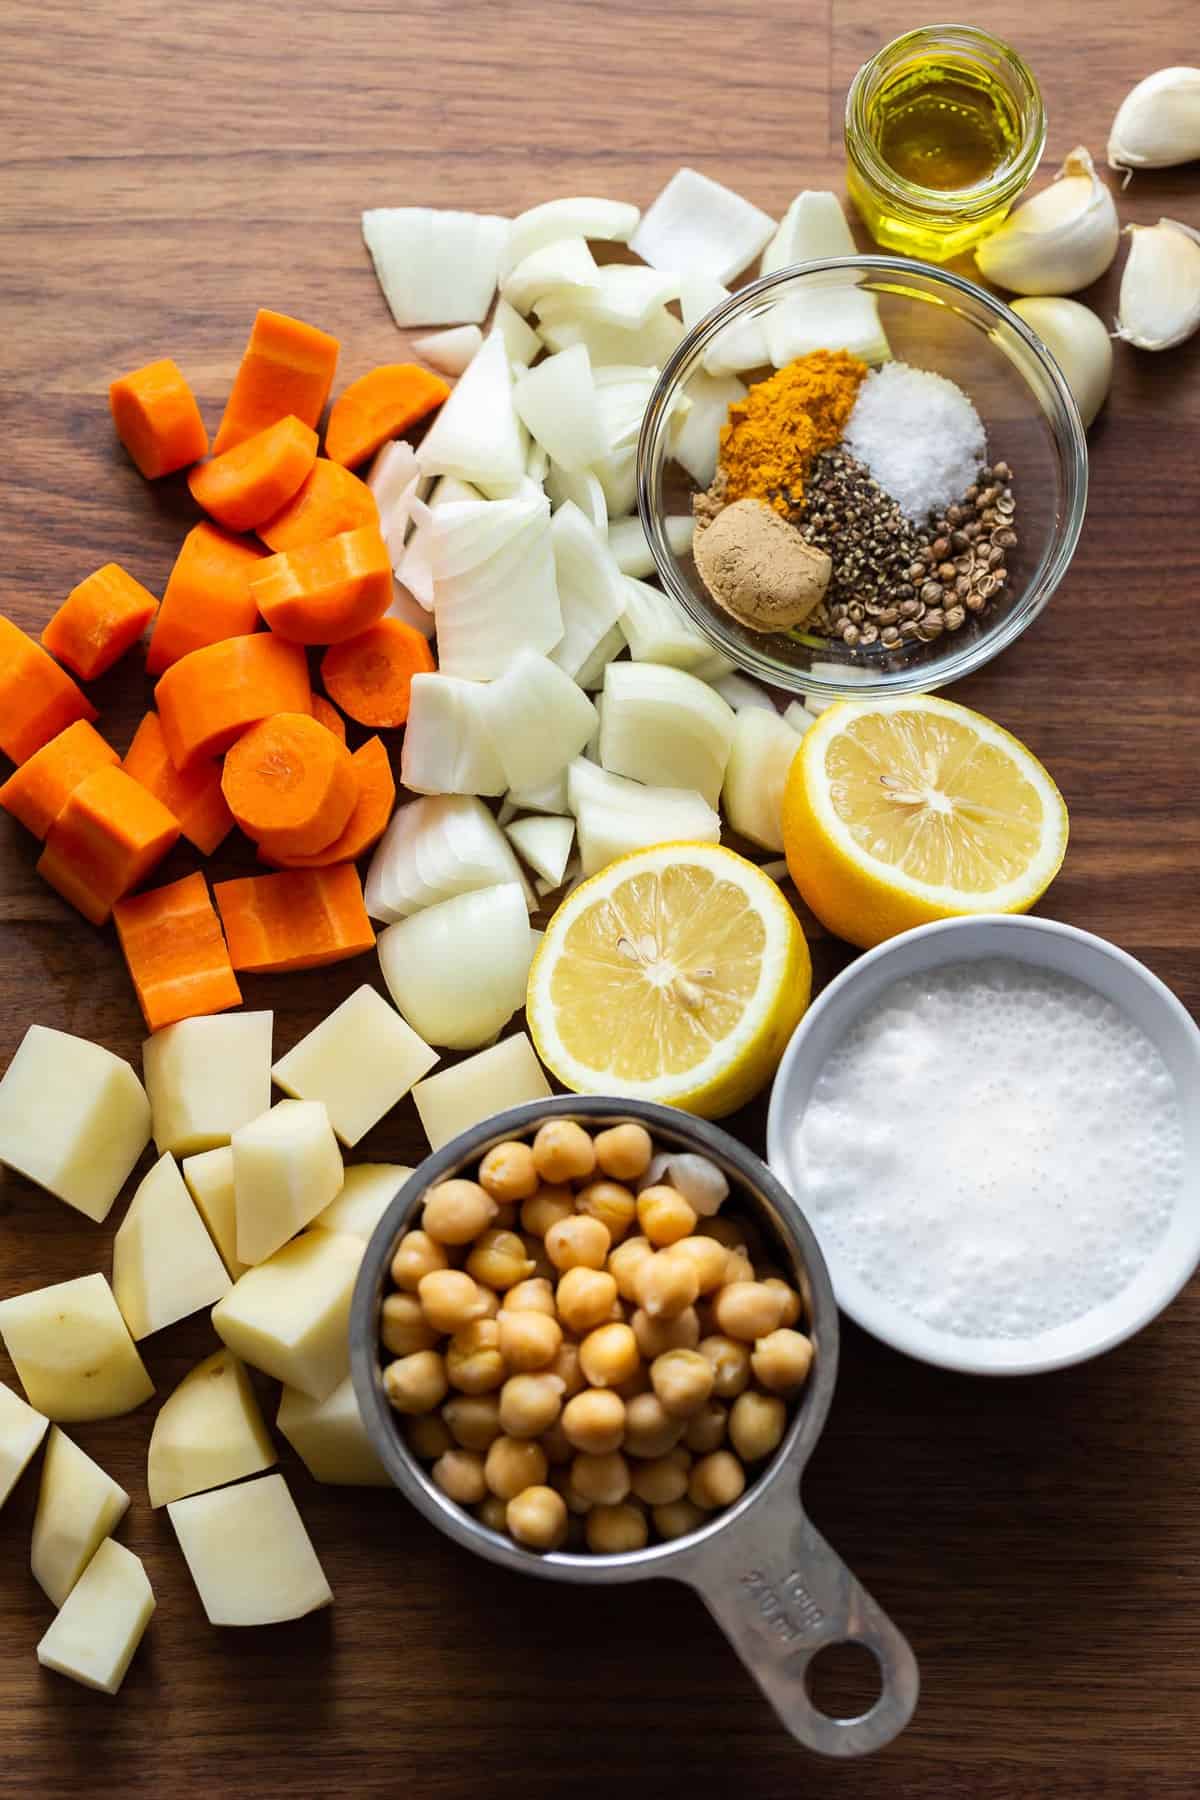 Ingredients for making chickpea turmeric soup: carrots, onion, potatoes, chickpeas, lemon, coconut milk, spices, and garlic.